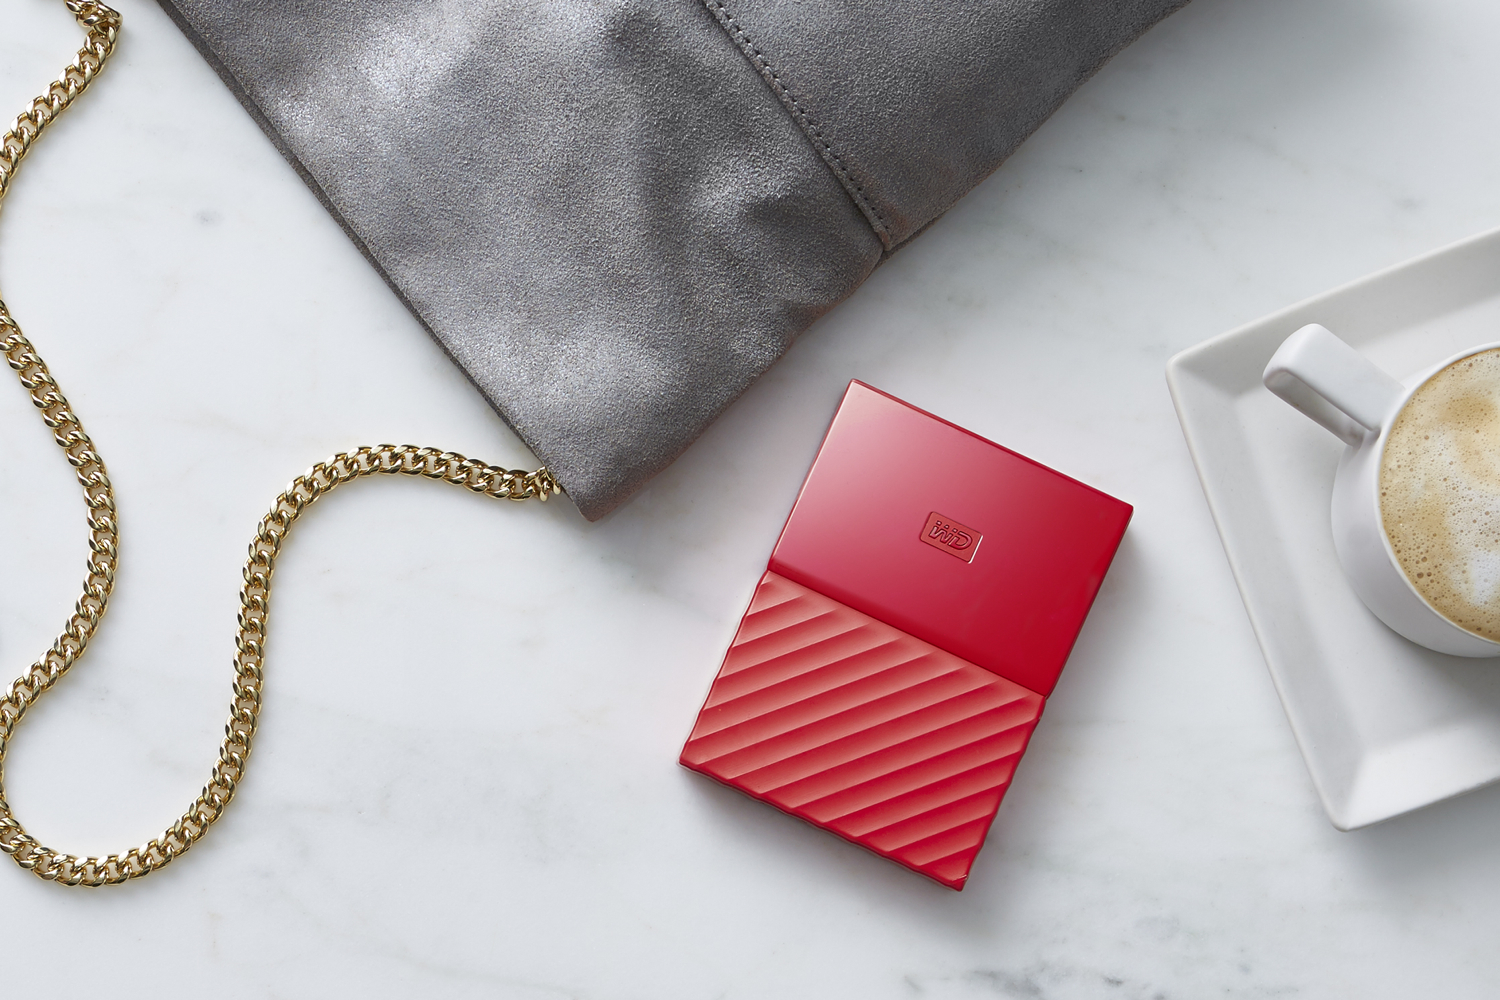 western digital releases redesigned portable hard drives wd mypassportpc red tabletop hires